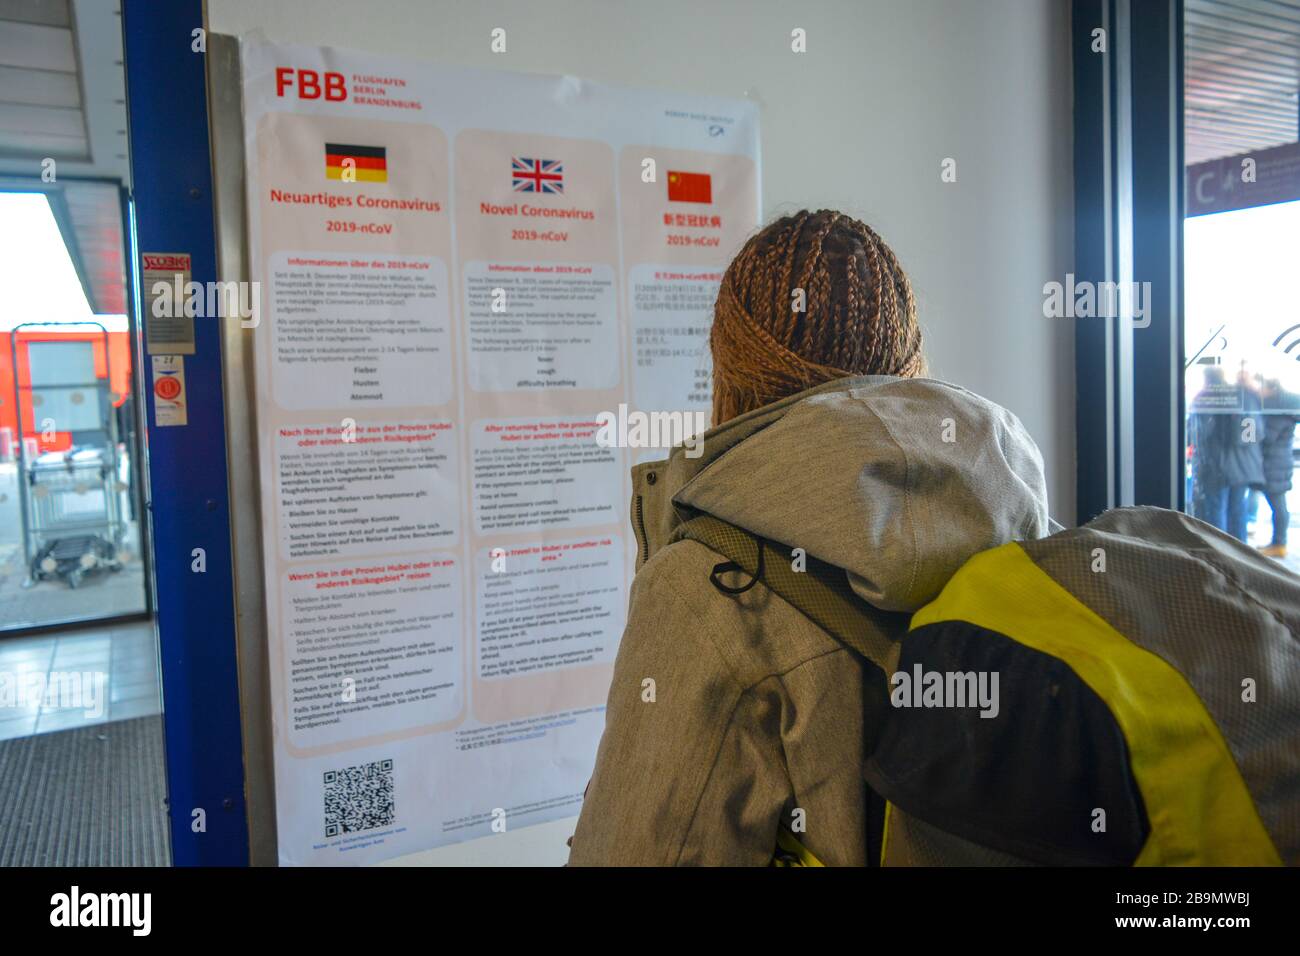 Berlin Schonefeld Airport SXF, Germany - 02/01/20: A warning public notice about Coronavirus 2019-nCoV in the airport terminal read by a traveller. Stock Photo